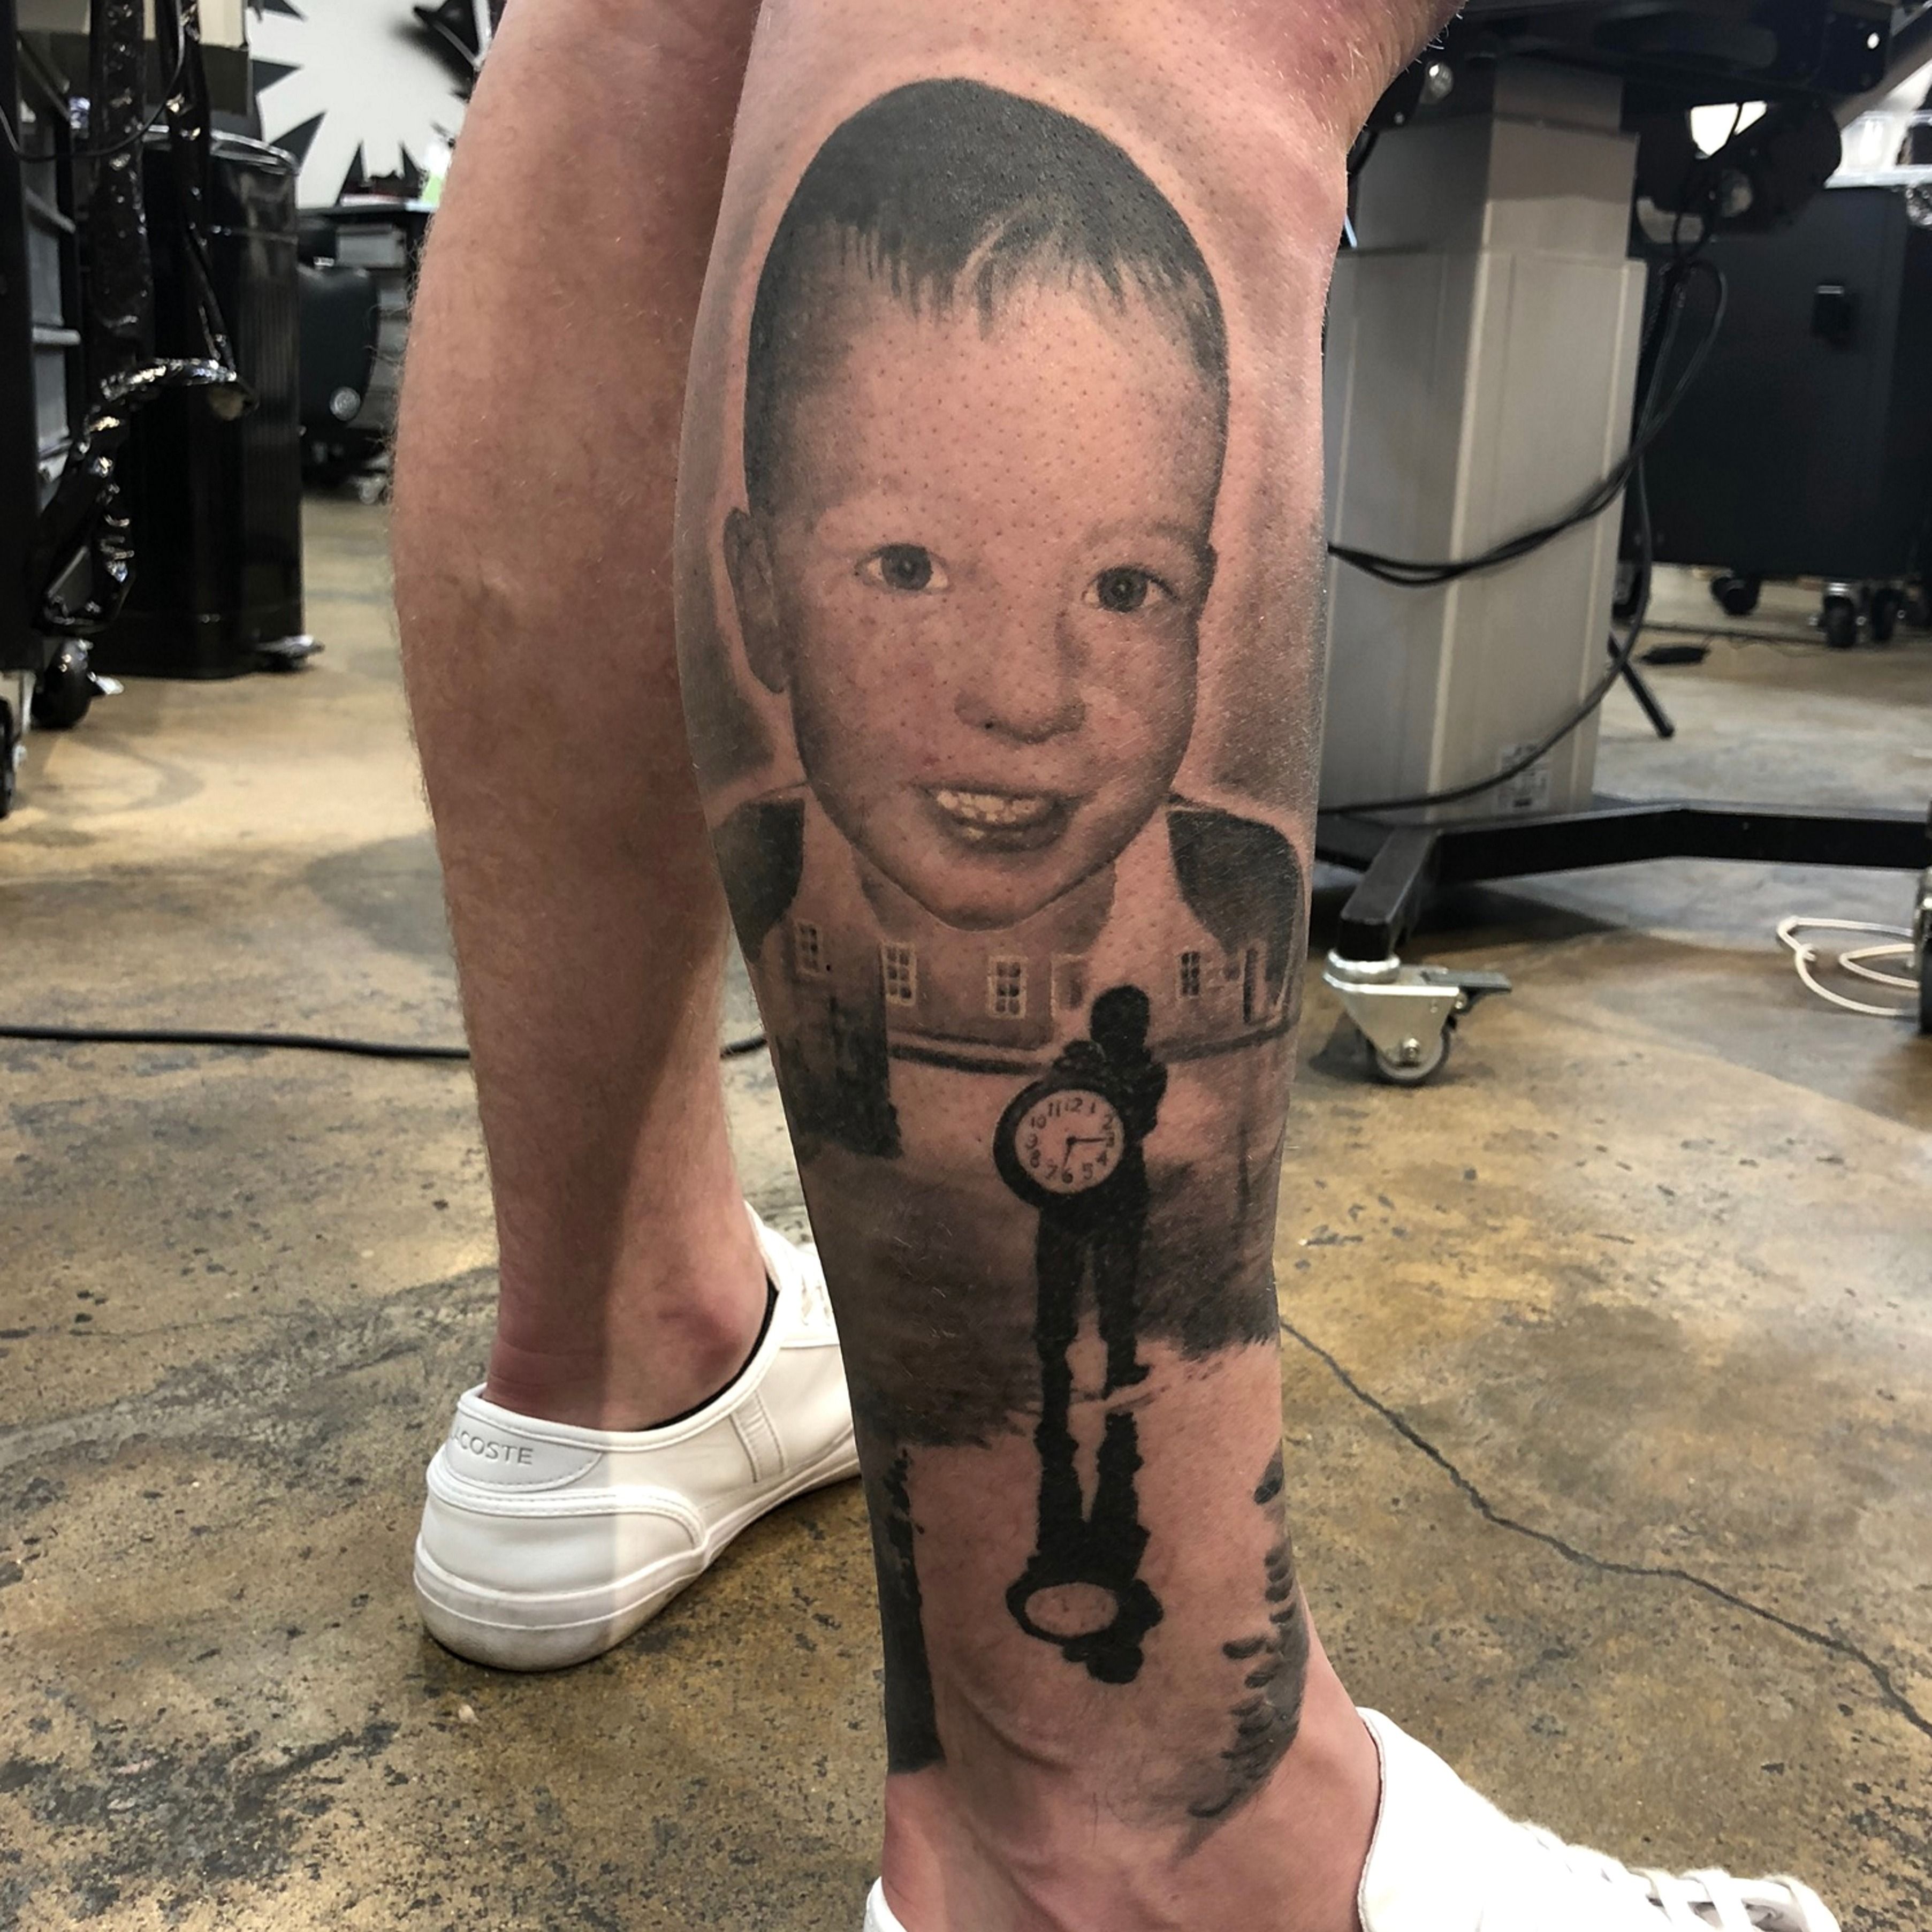 Super cute baby footprint tattoo by nainstattoos skinmachinetattoo  Designed by aakashchandani Foot sanitised completely before and after  touching the tattoo babytattoo footprinttattoo inkedgirls inkedmen  babyfoottattoo skinmachinetattoo 